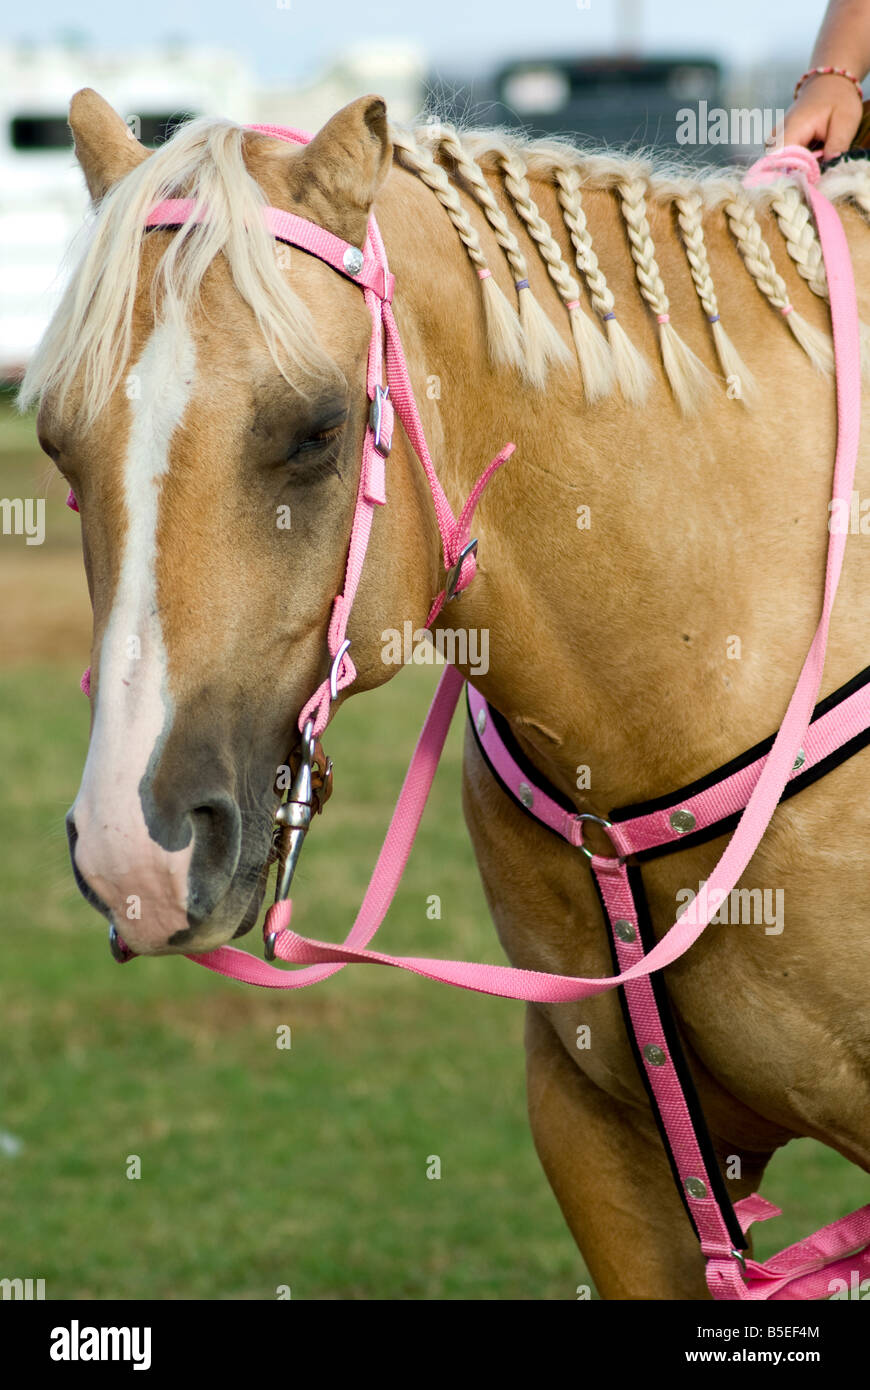 Horse with braided mane and pink bridle Stock Photo